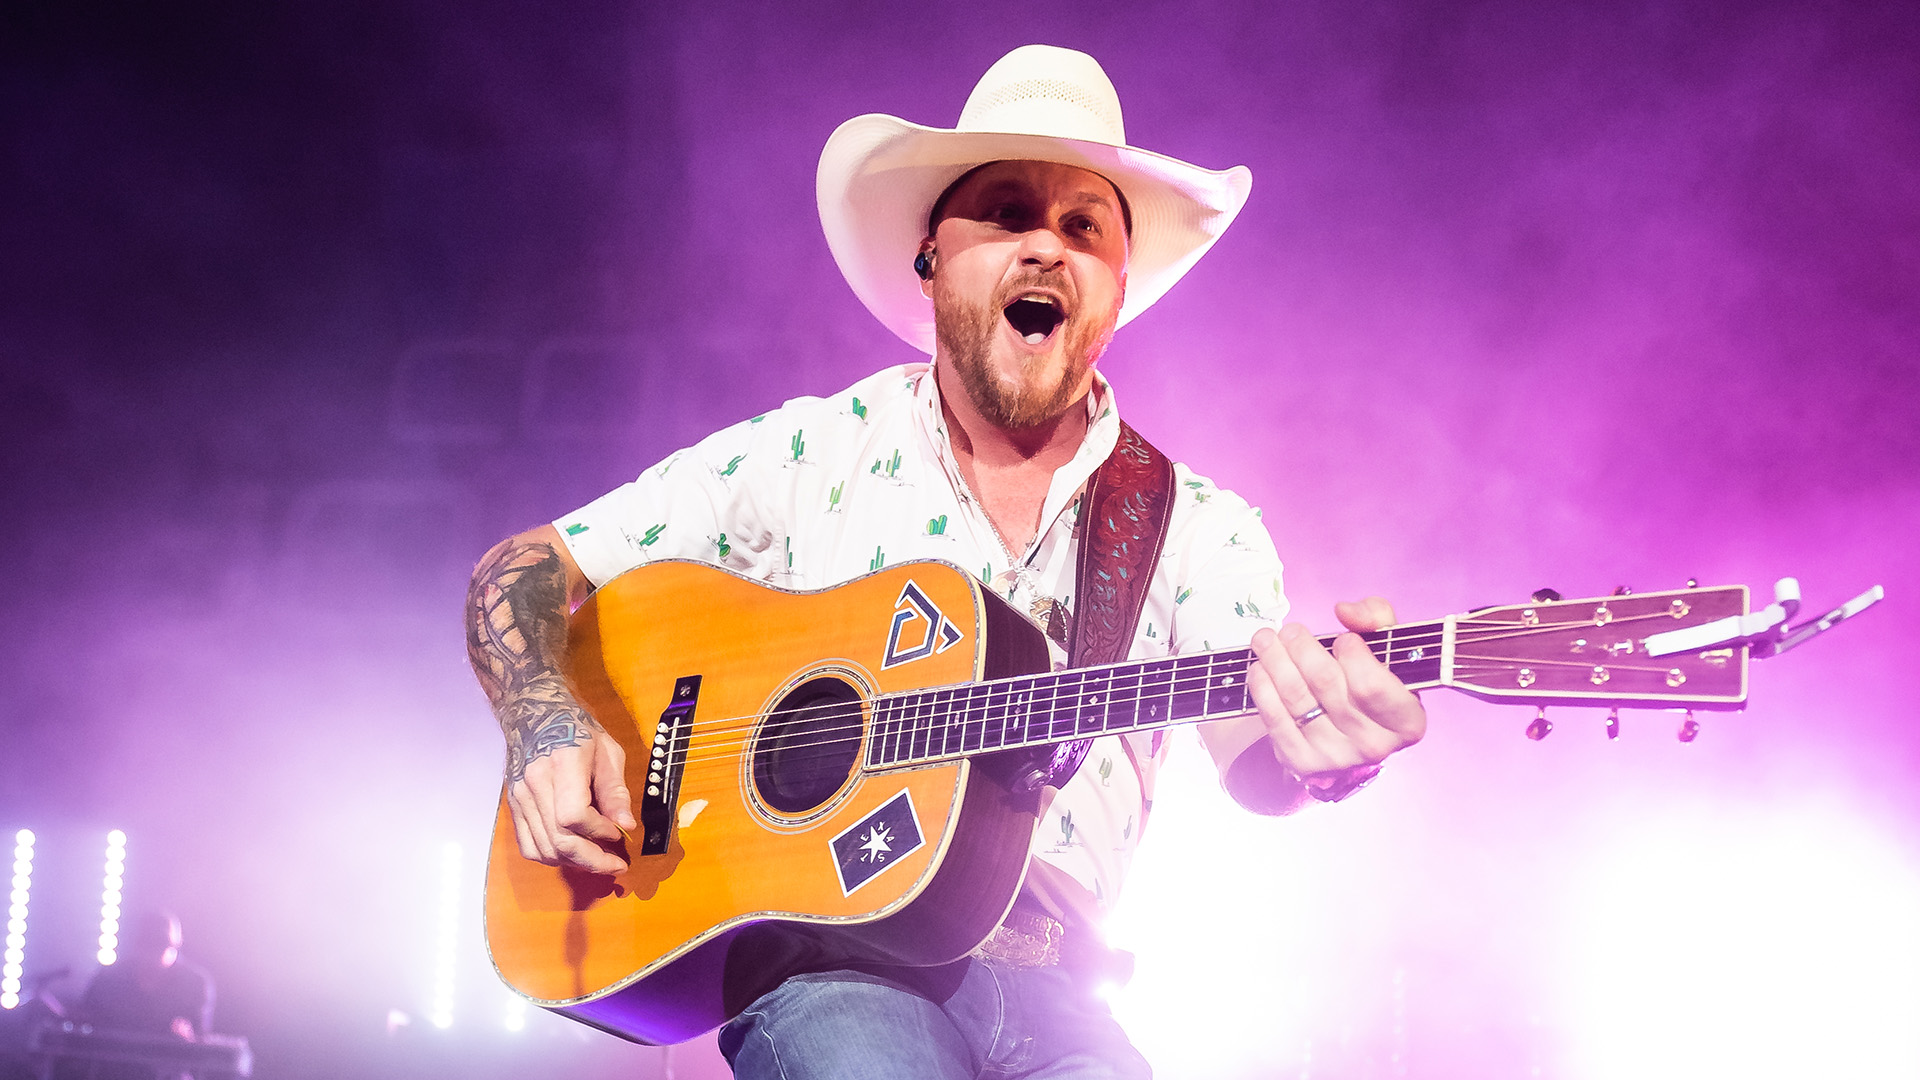 Cody Johnson performs at FirstBank Amphitheater on July 28, 2022 in Franklin, Tennessee.